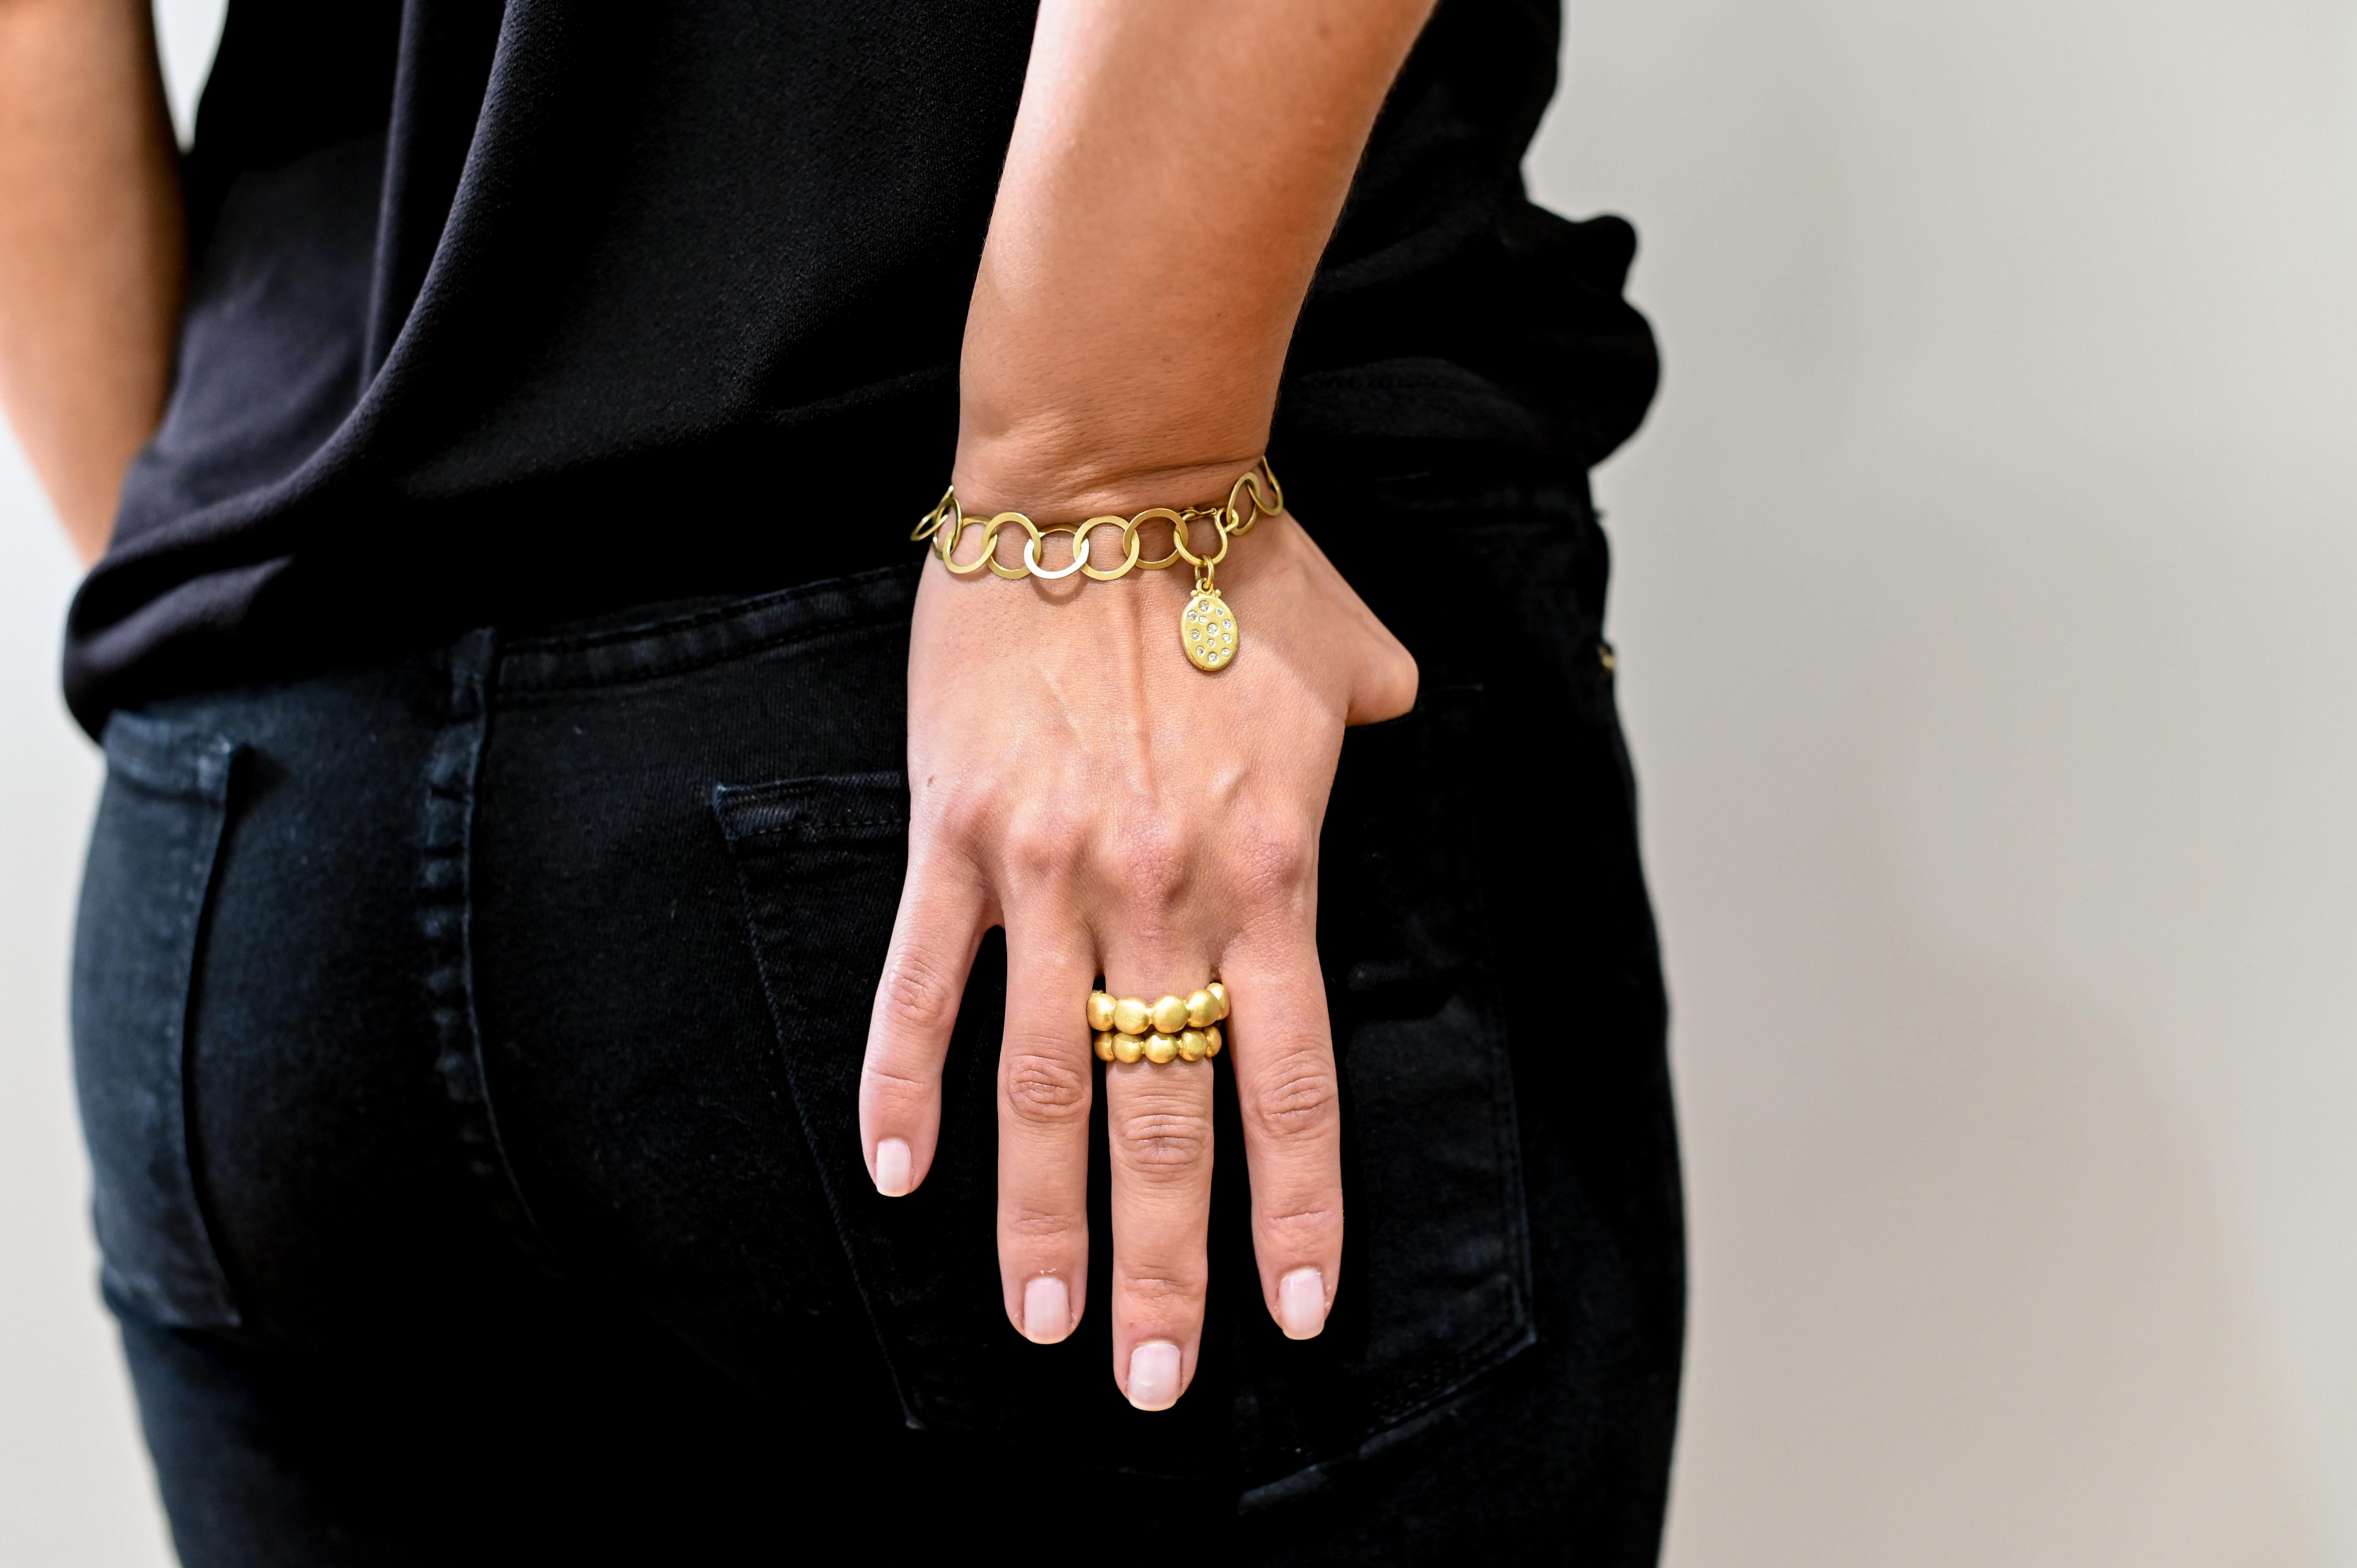 Handmade in 18K Green Gold, Faye Kim's chain link is bracelet is planished and matte-finished for a fresh, modern feel. The safety clasp adds extra security and can be used to display a variety of charms to help personalize your look.

Photographed